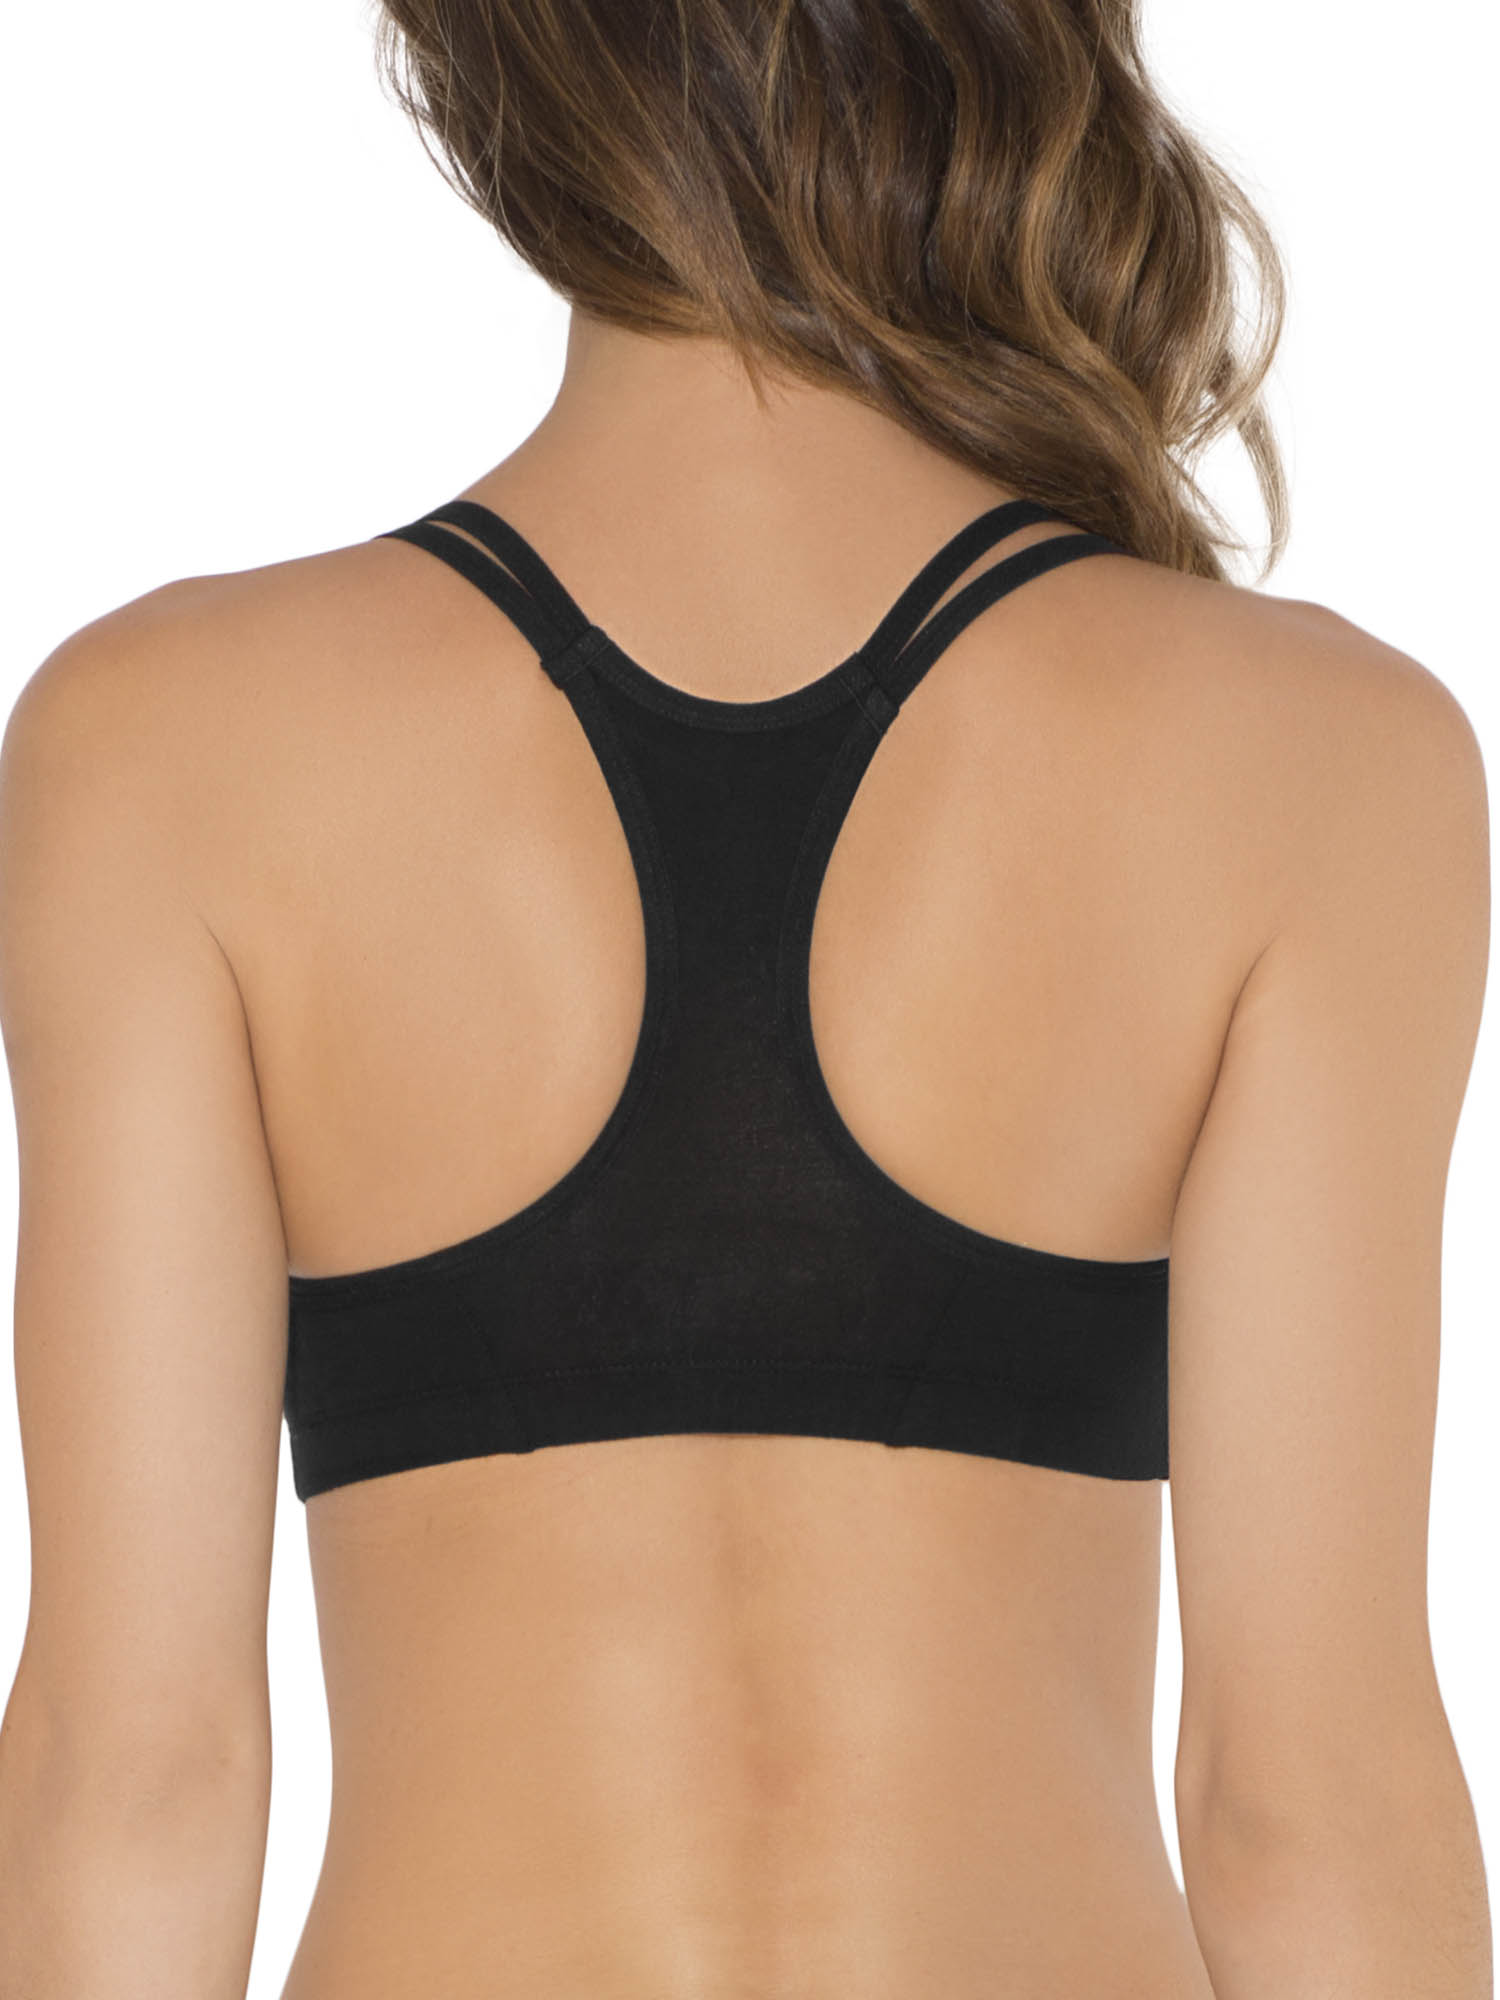 Fruit of the Loom Women's Spaghetti Strap Cotton Sports Bra, 3-Pack, Style-9036 - image 2 of 8